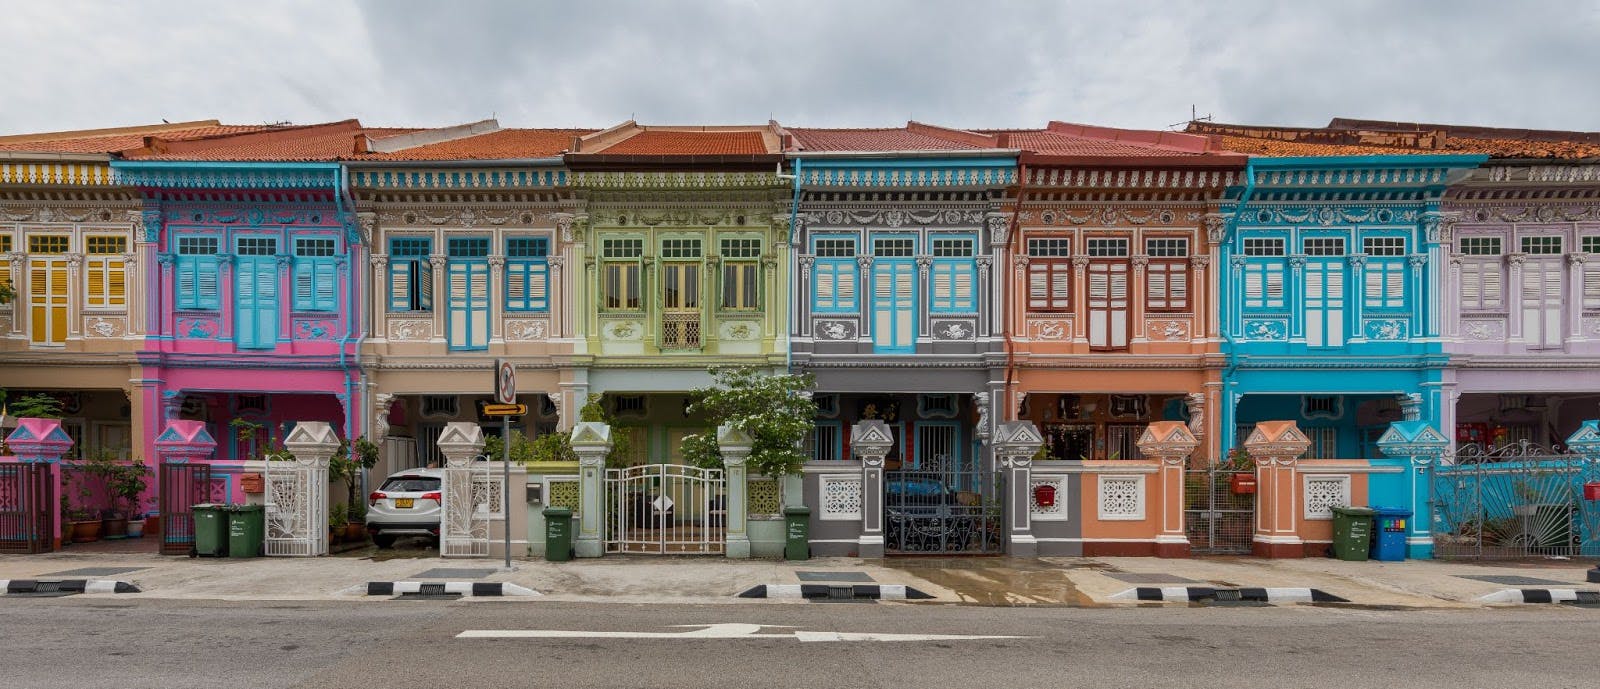 The immediate vicinity of Sundance Vista condominium is enhanced by the row of colourful, well-preserved Peranakan houses that have become the iconic landmark of Joo Chiat estate